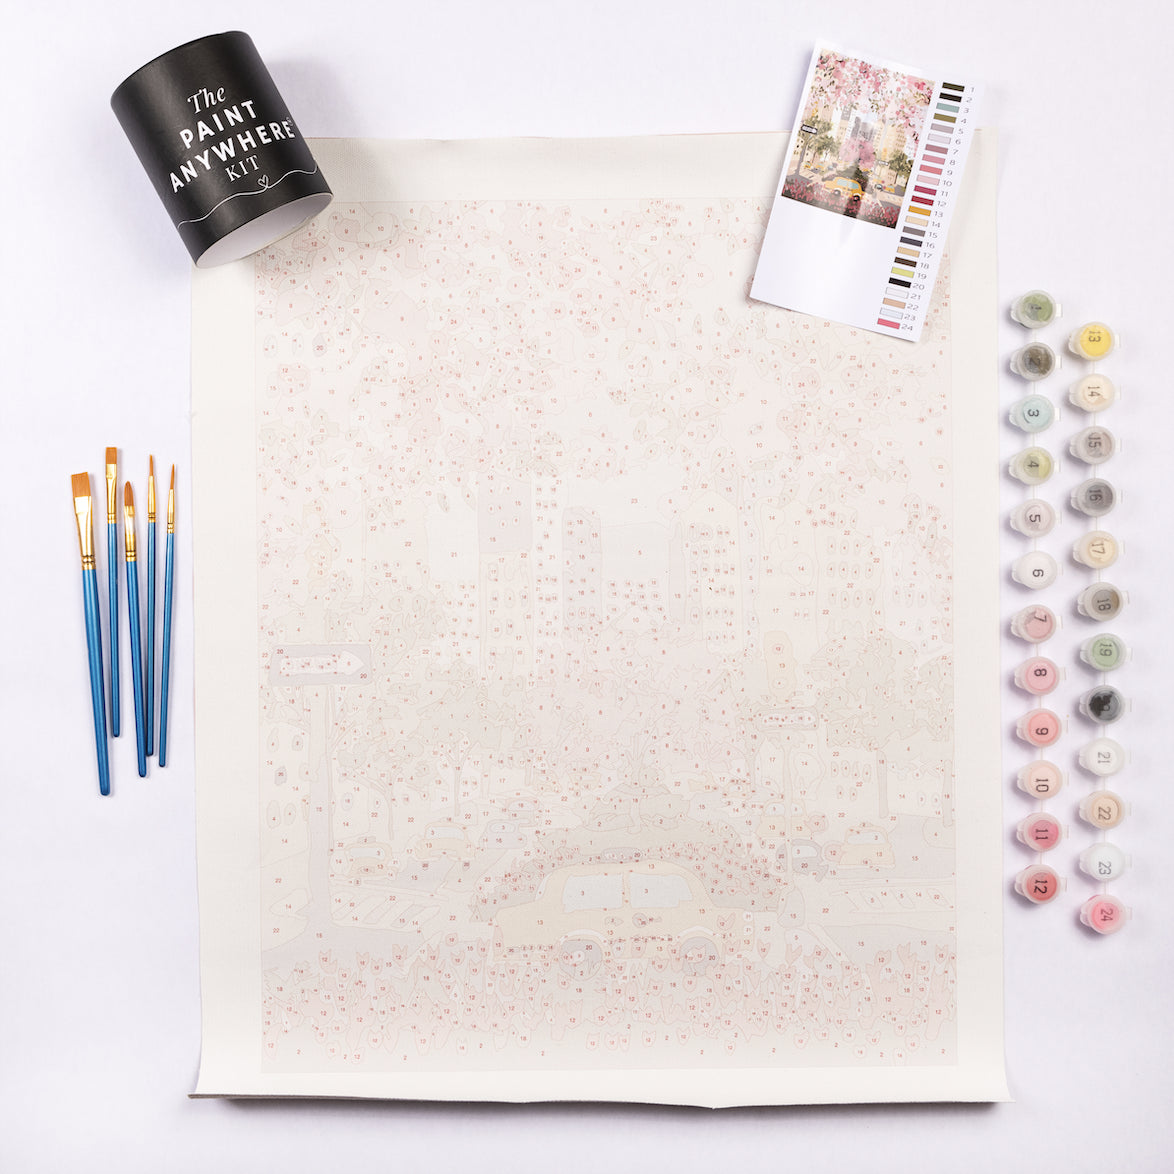 Park Avenue Spring Paint by Numbers Deluxe